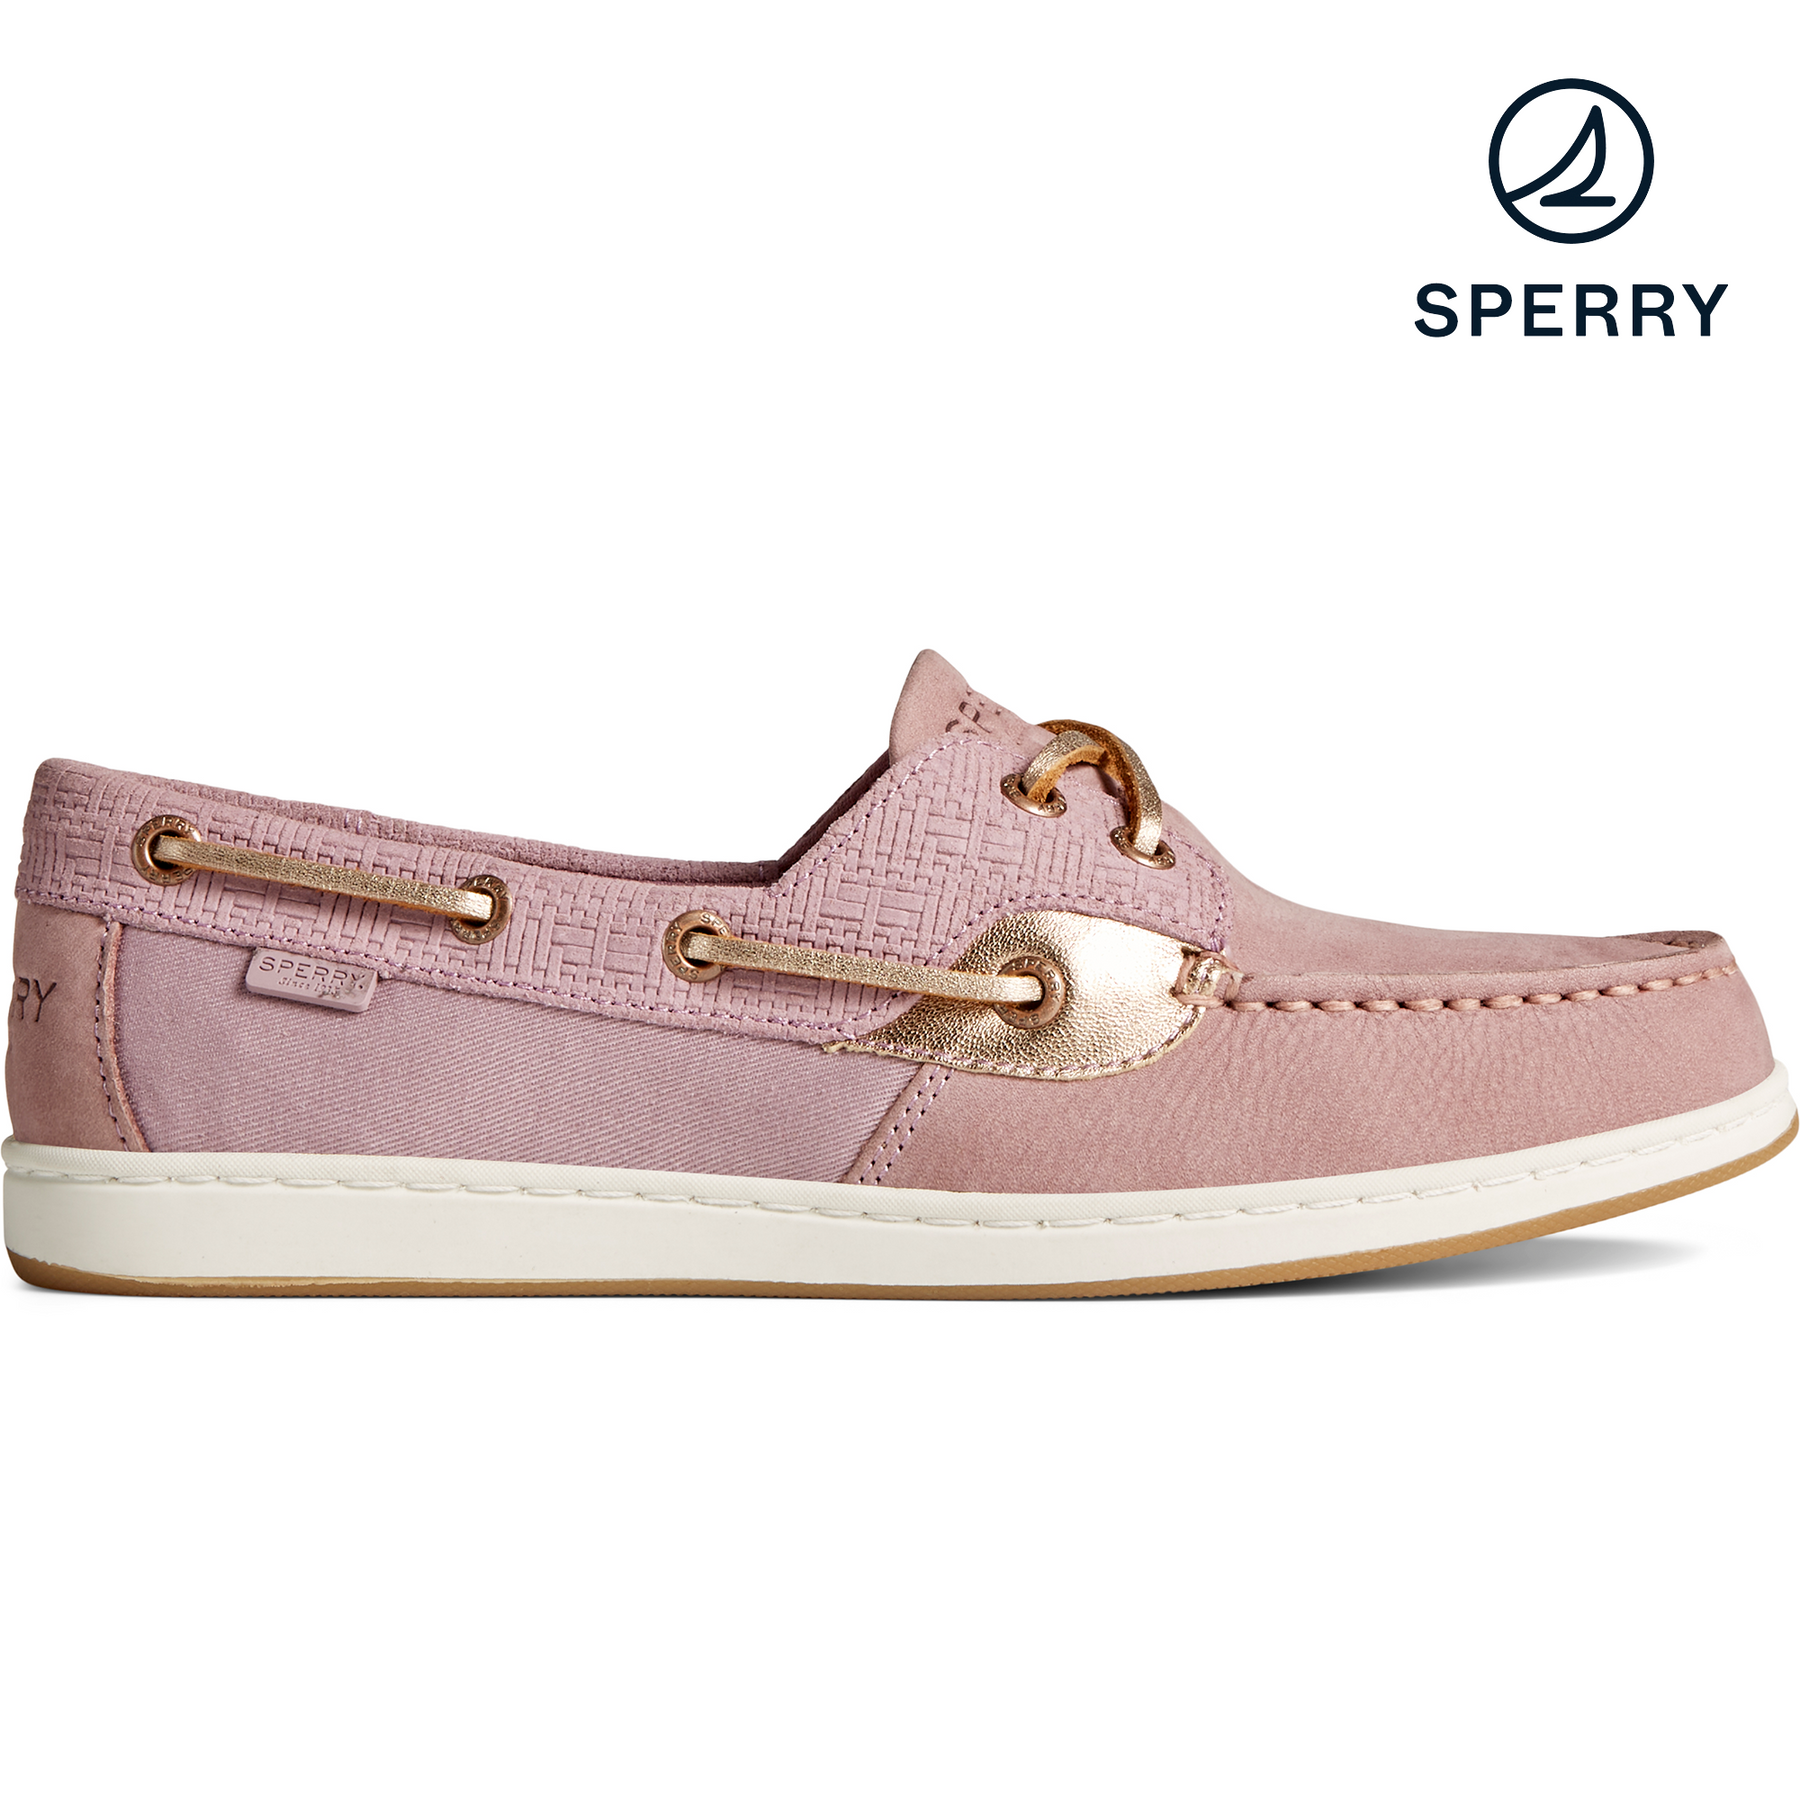 Women's Coastfish Woven Boat Shoes - Berry (STS87624)